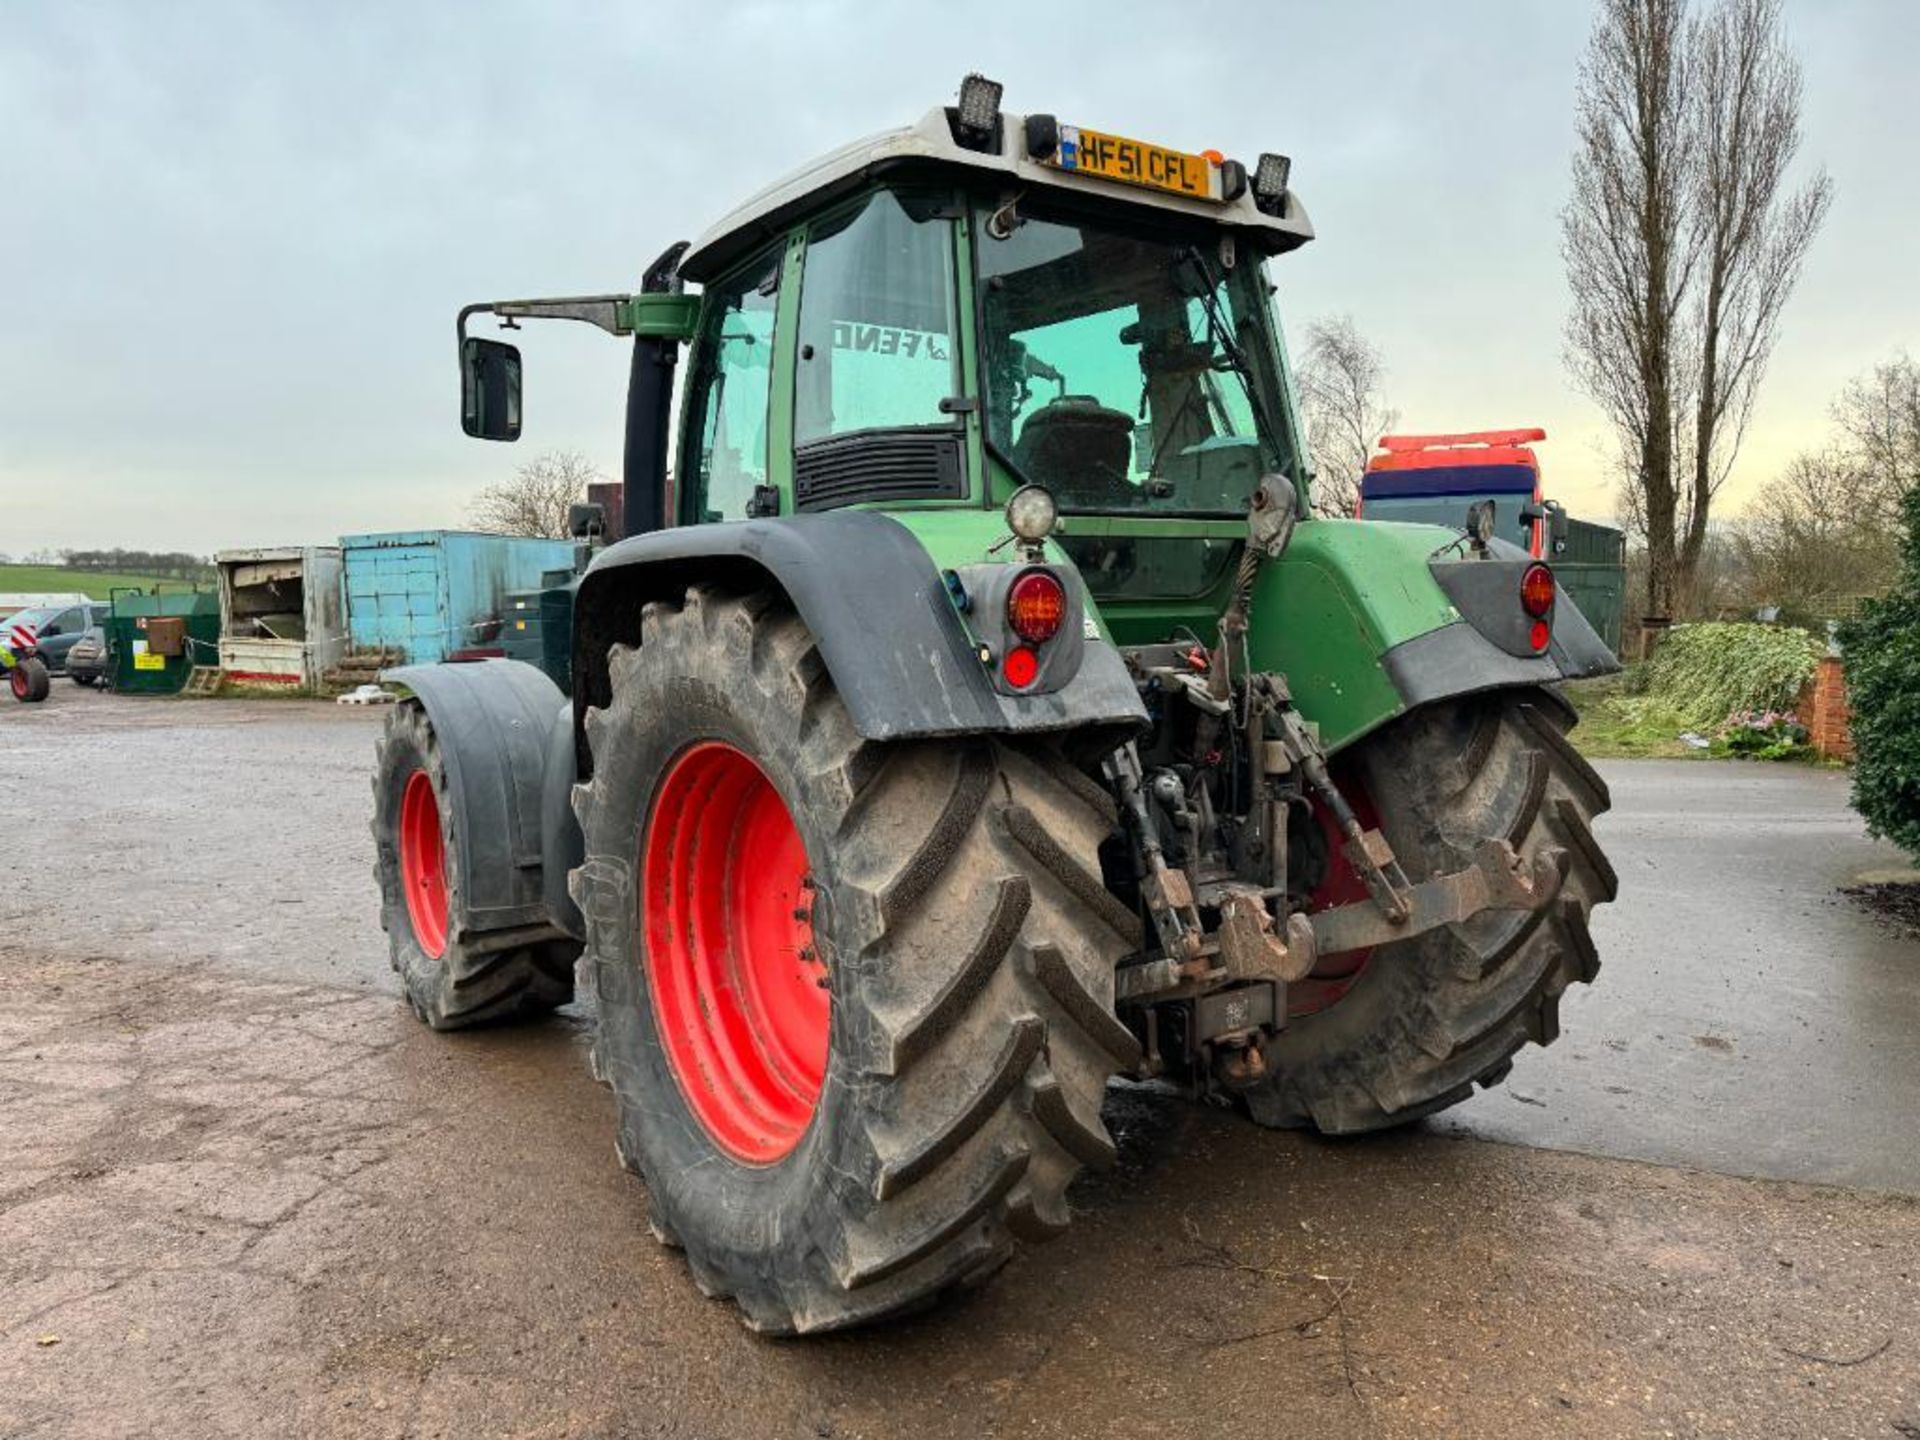 2001 Fendt 716 Vario 50kph 4wd tractor with 4 electric spools, air brakes and front linkage on BKT 5 - Image 10 of 22